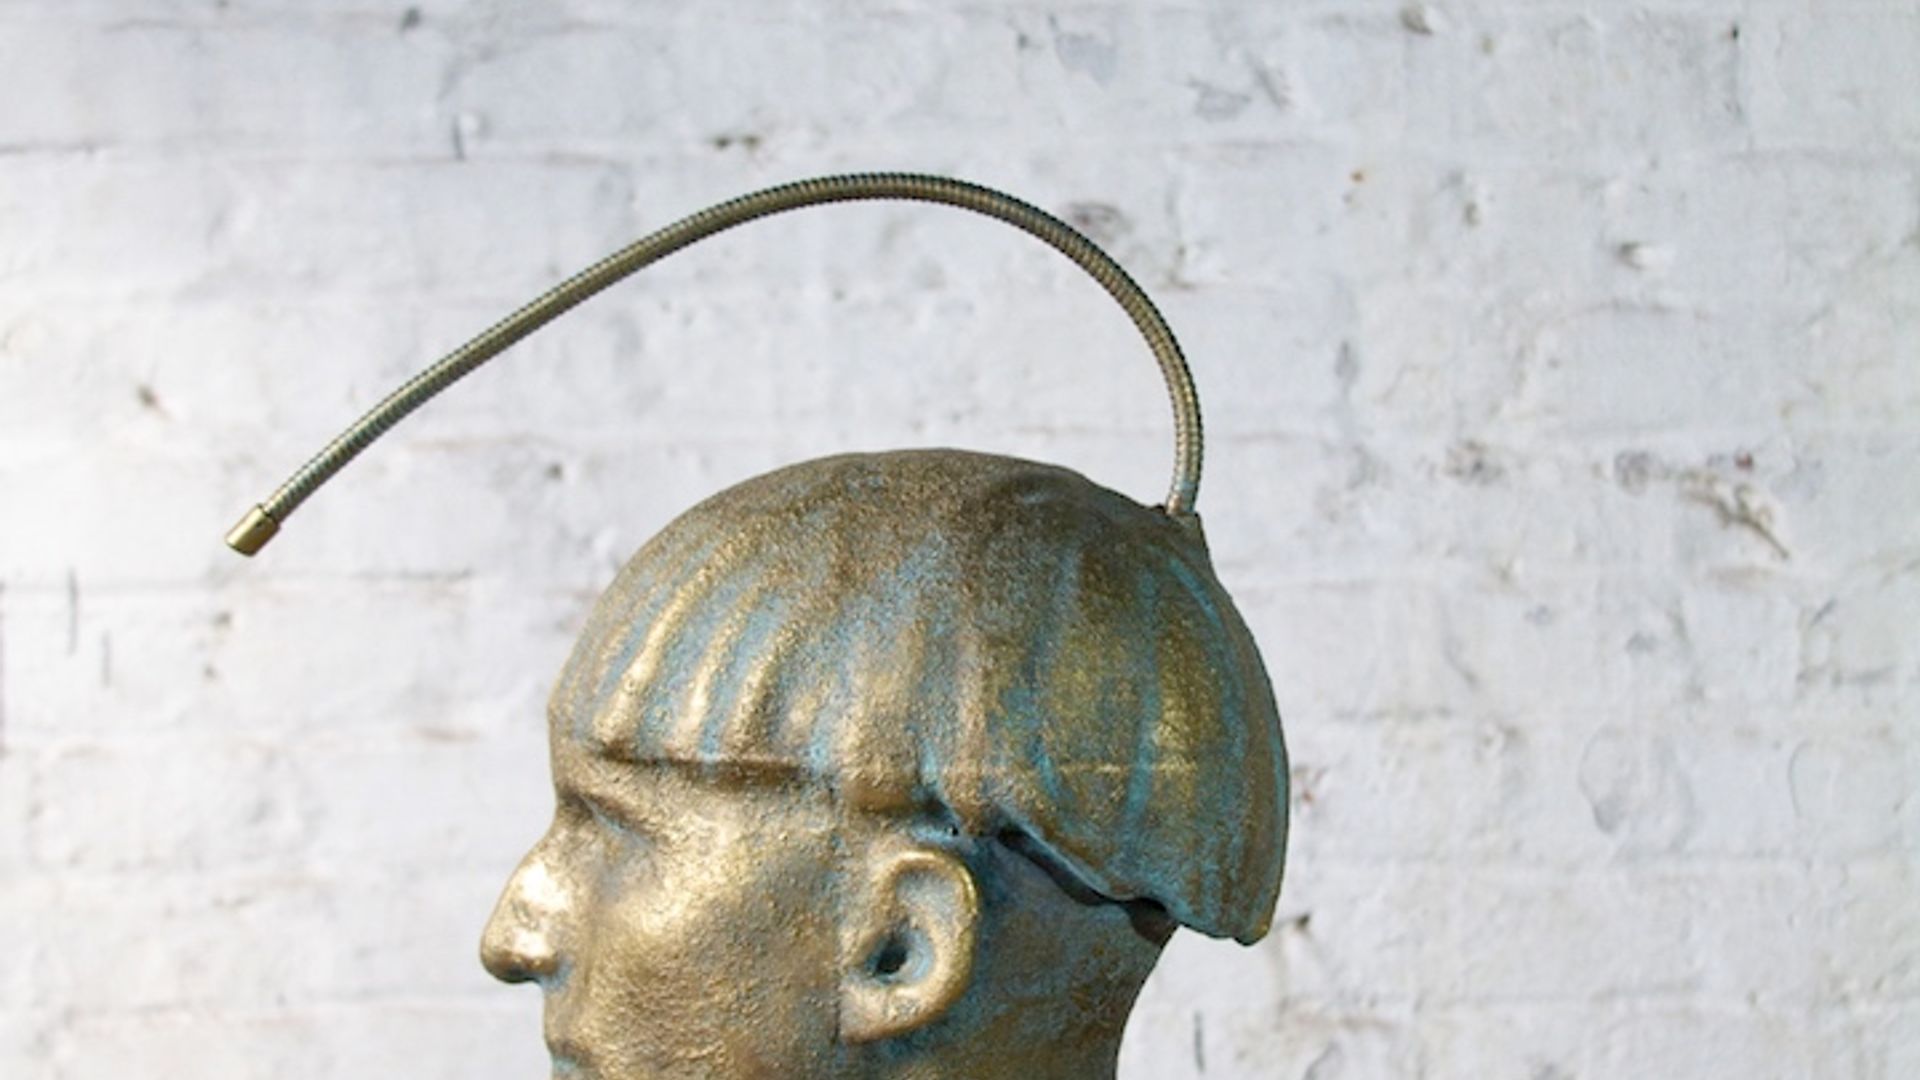 Sculpture of Neil Harbisson, the world's first cyborg, created by Budmen Industries